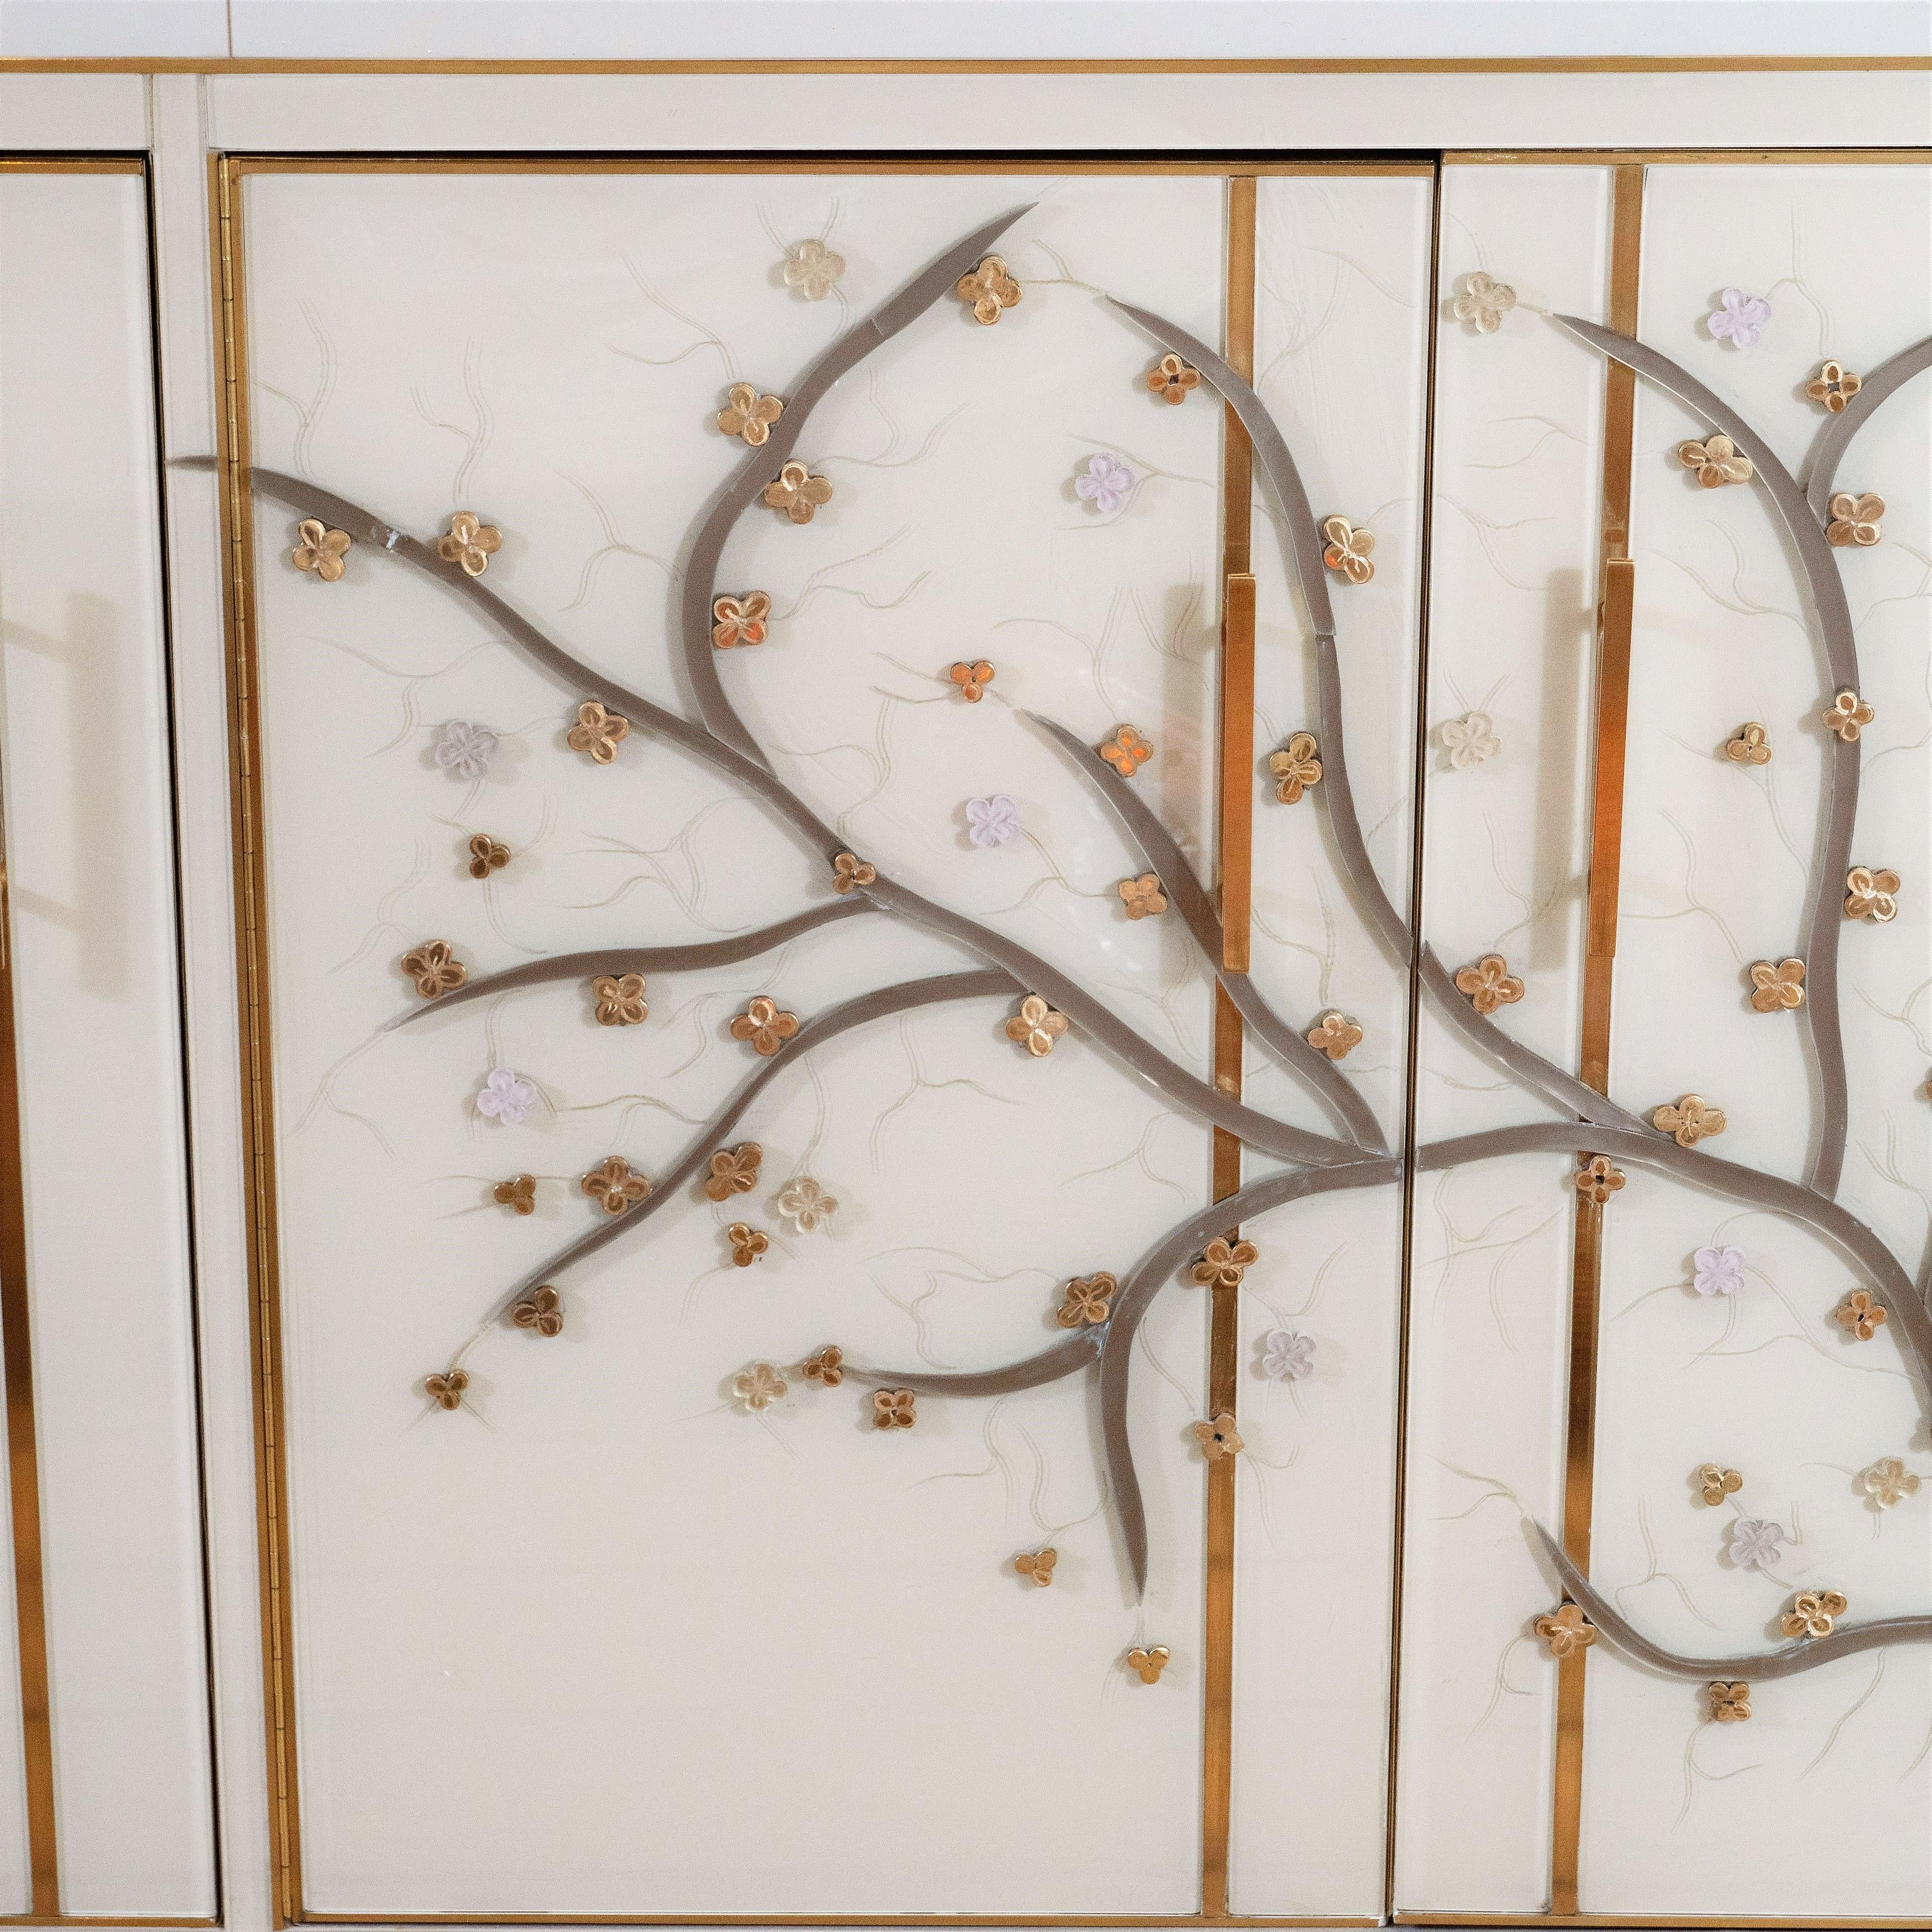 Brass Inlay and Ivory Murano Glass Flower Sideboard, Italy 2019, Pair Available (Hollywood Regency)